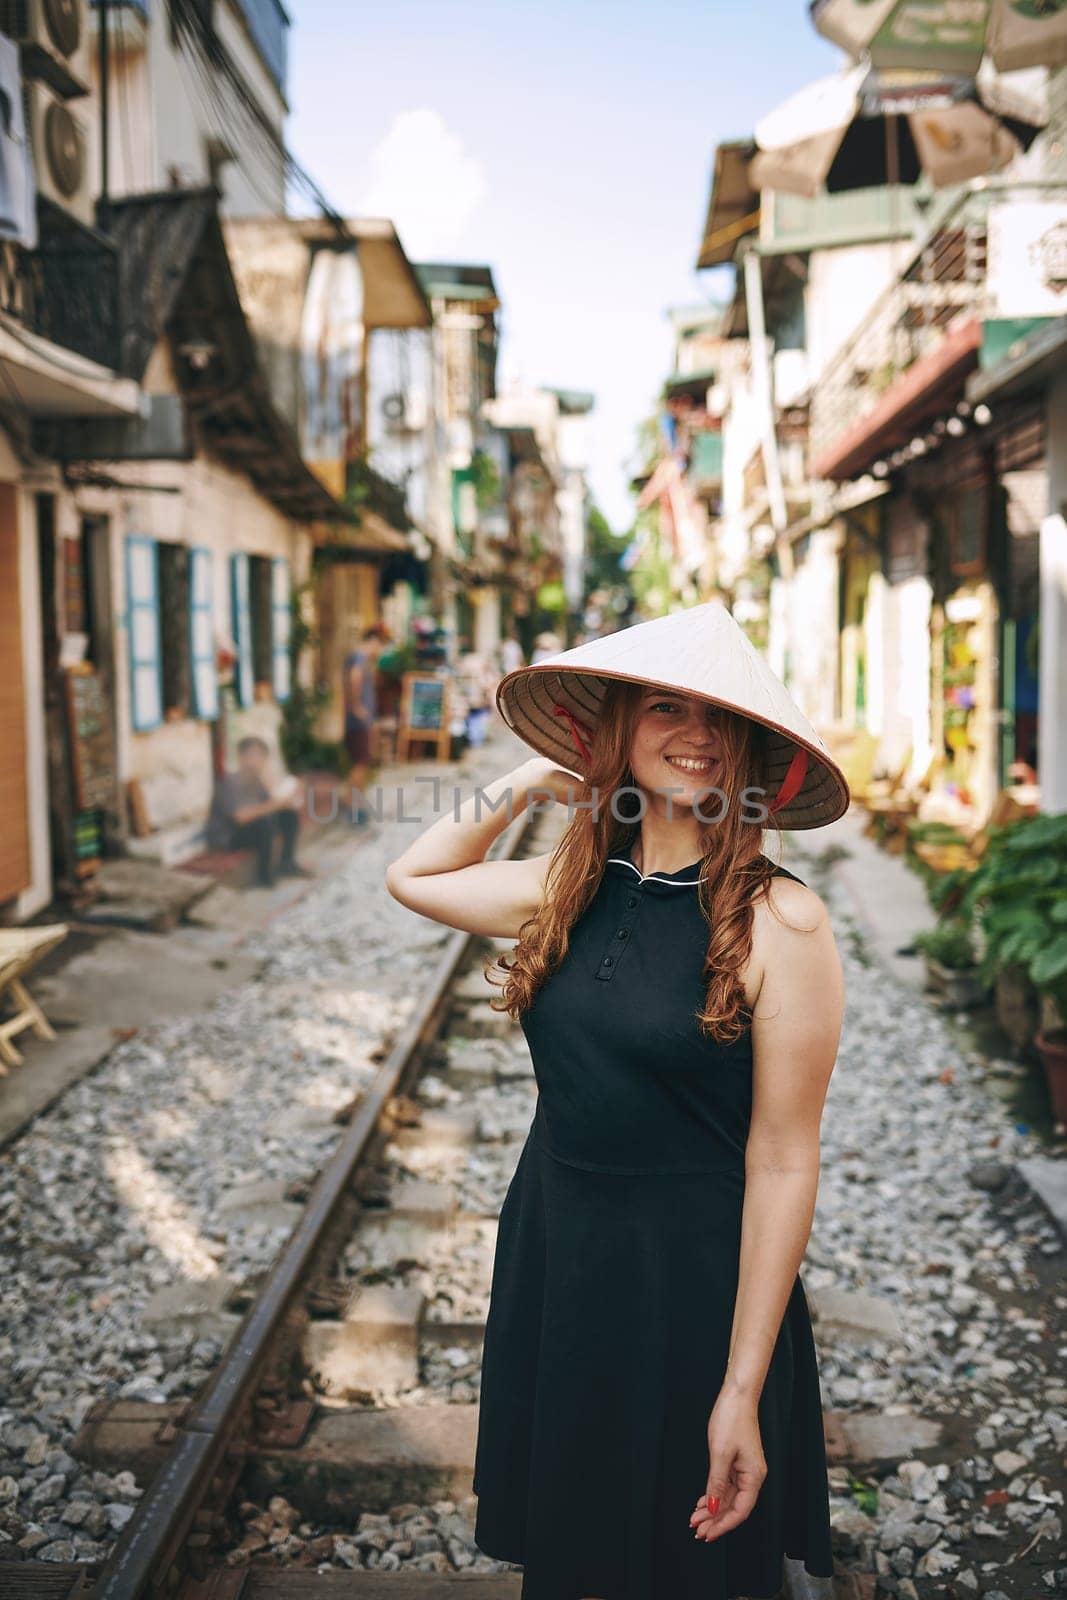 Travel to seek adventure and feel alive. a young woman wearing a conical hat while exploring a foreign city